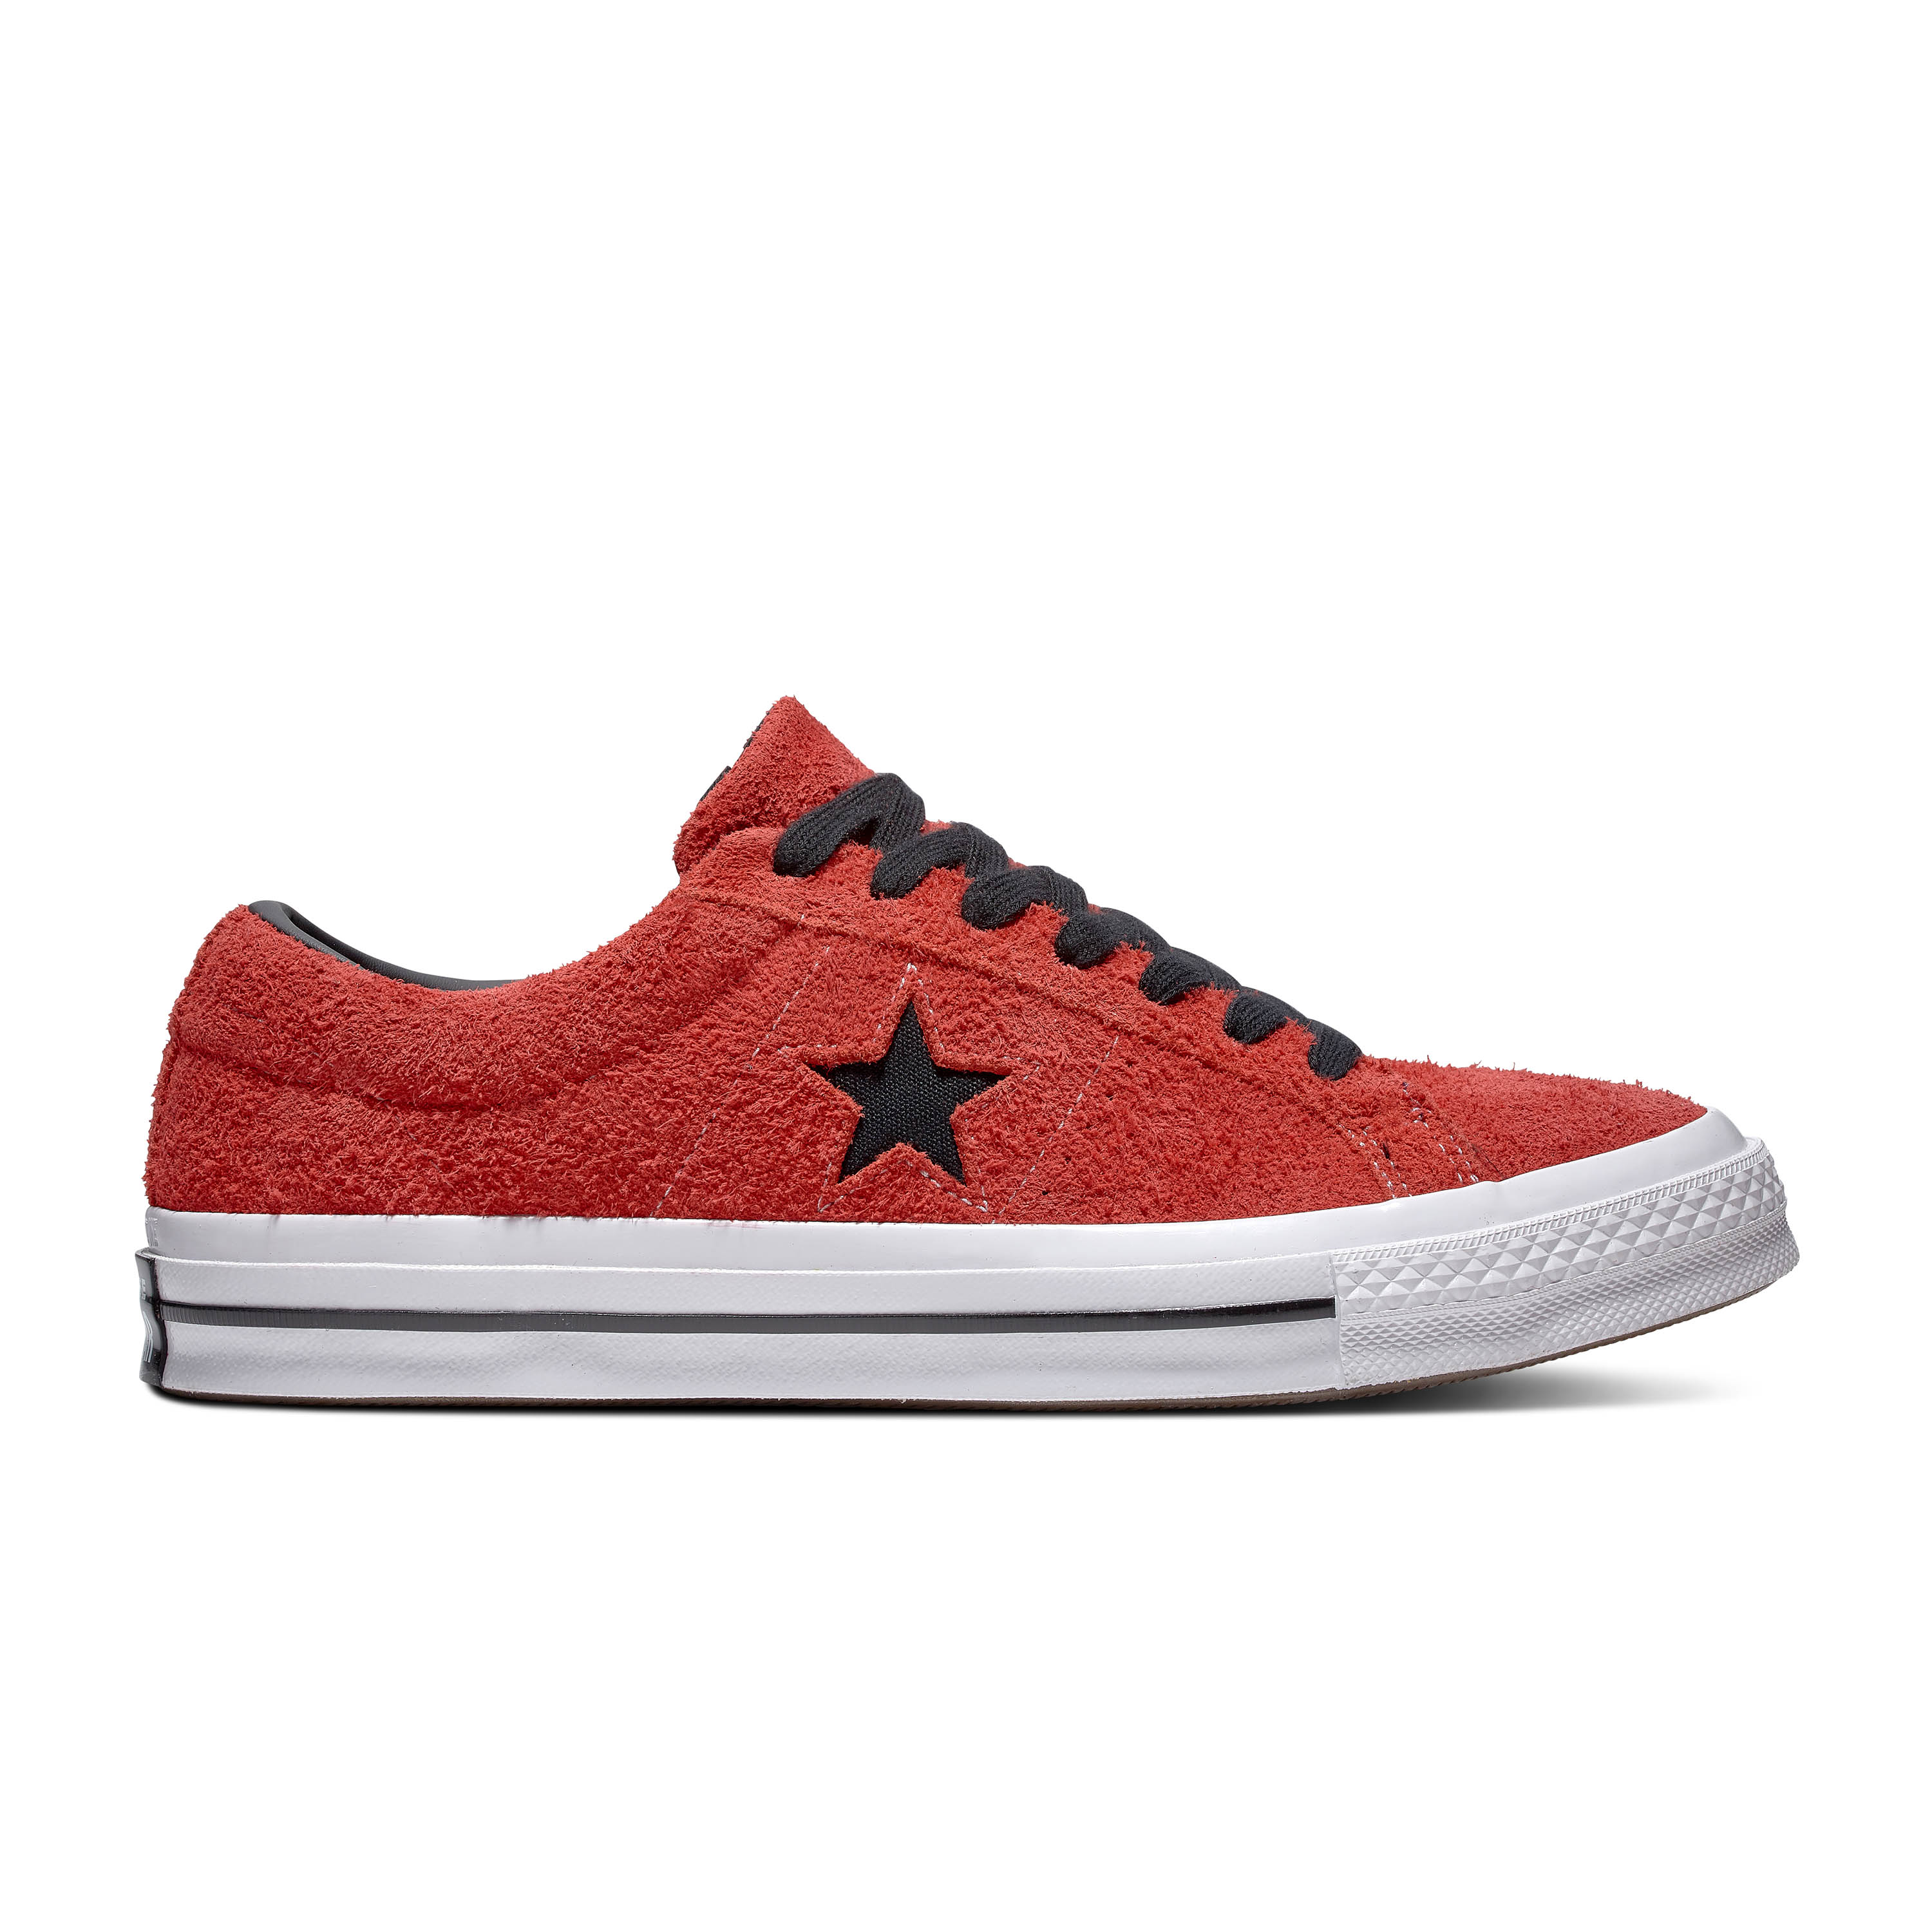 converse one star 45 years